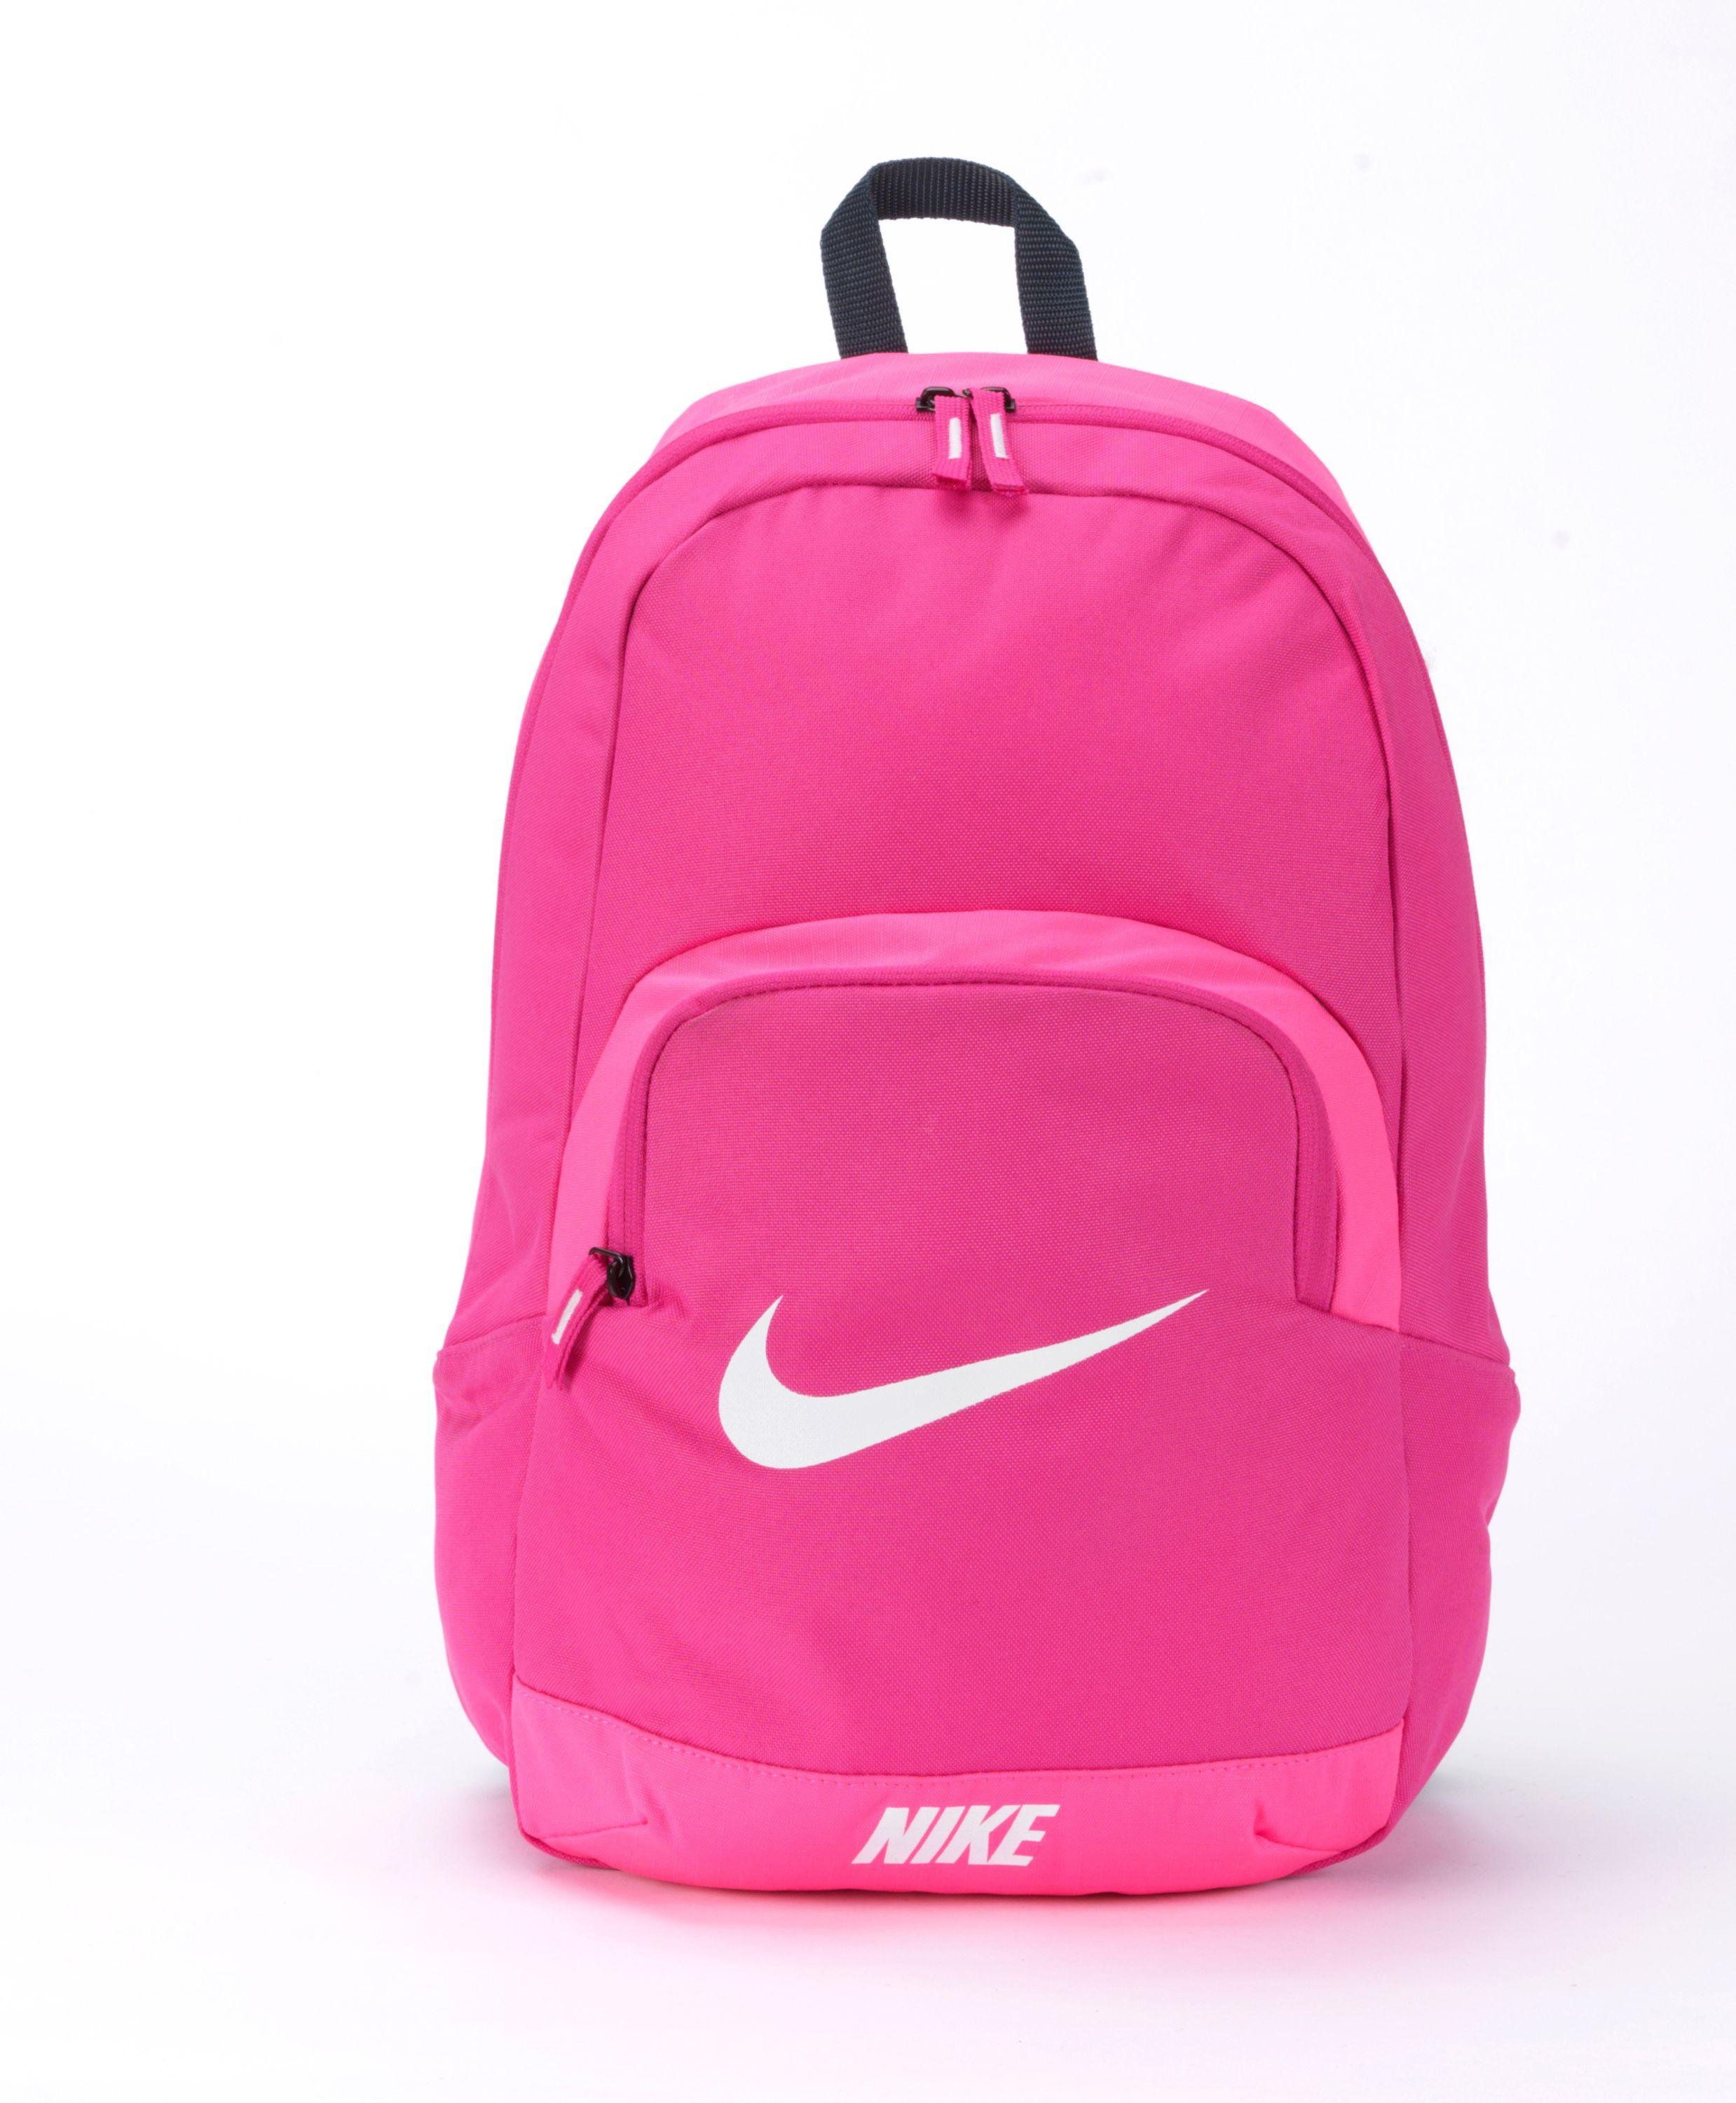 Nike - SMU Backpack Review